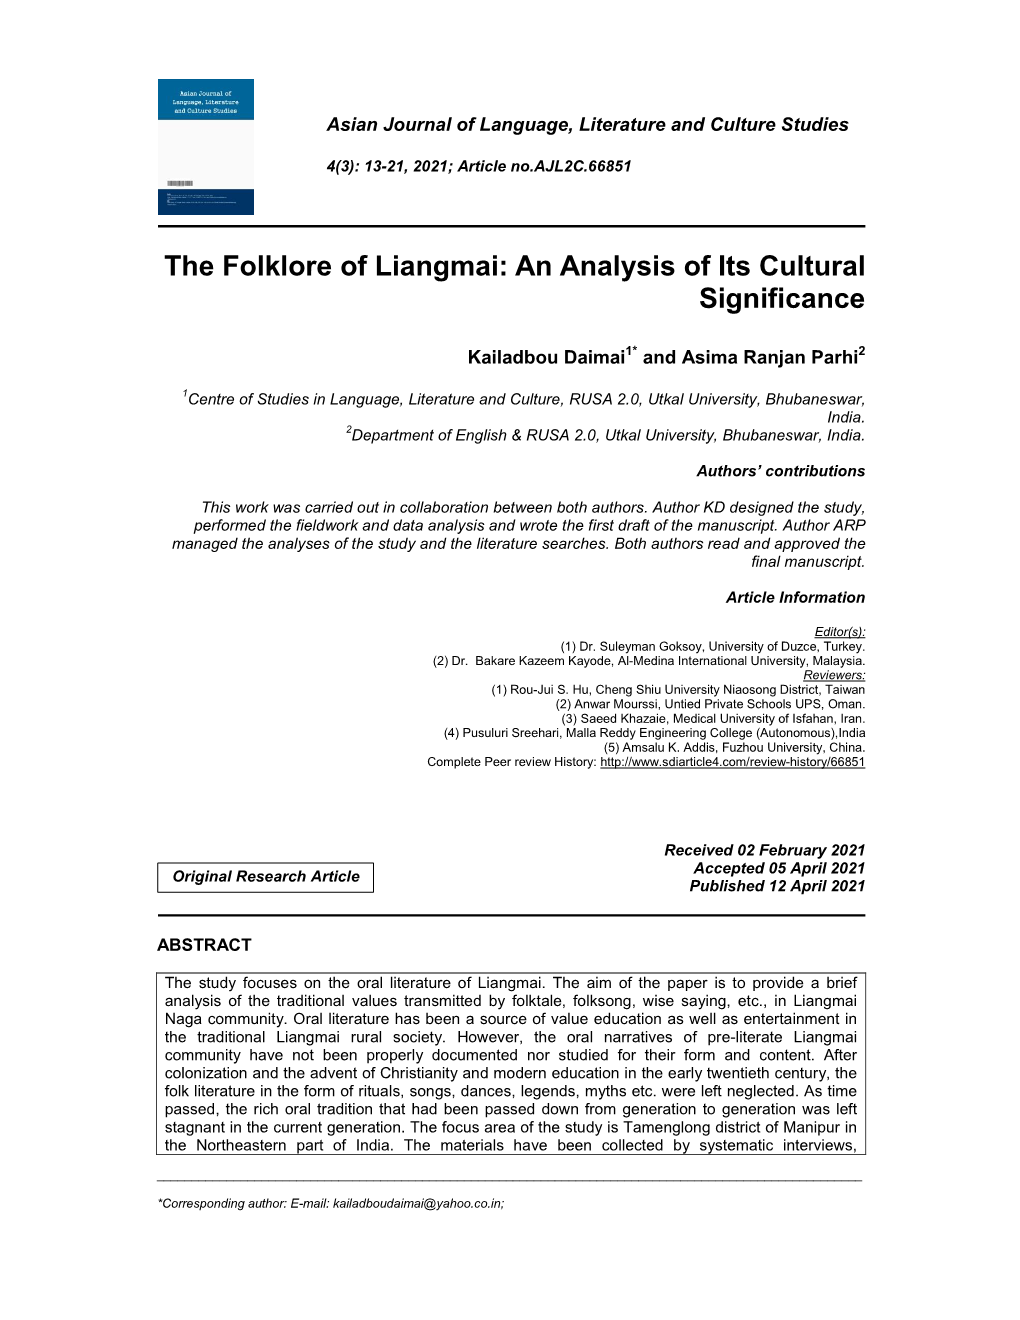 The Folklore of Liangmai: an Analysis of Its Cultural Significance